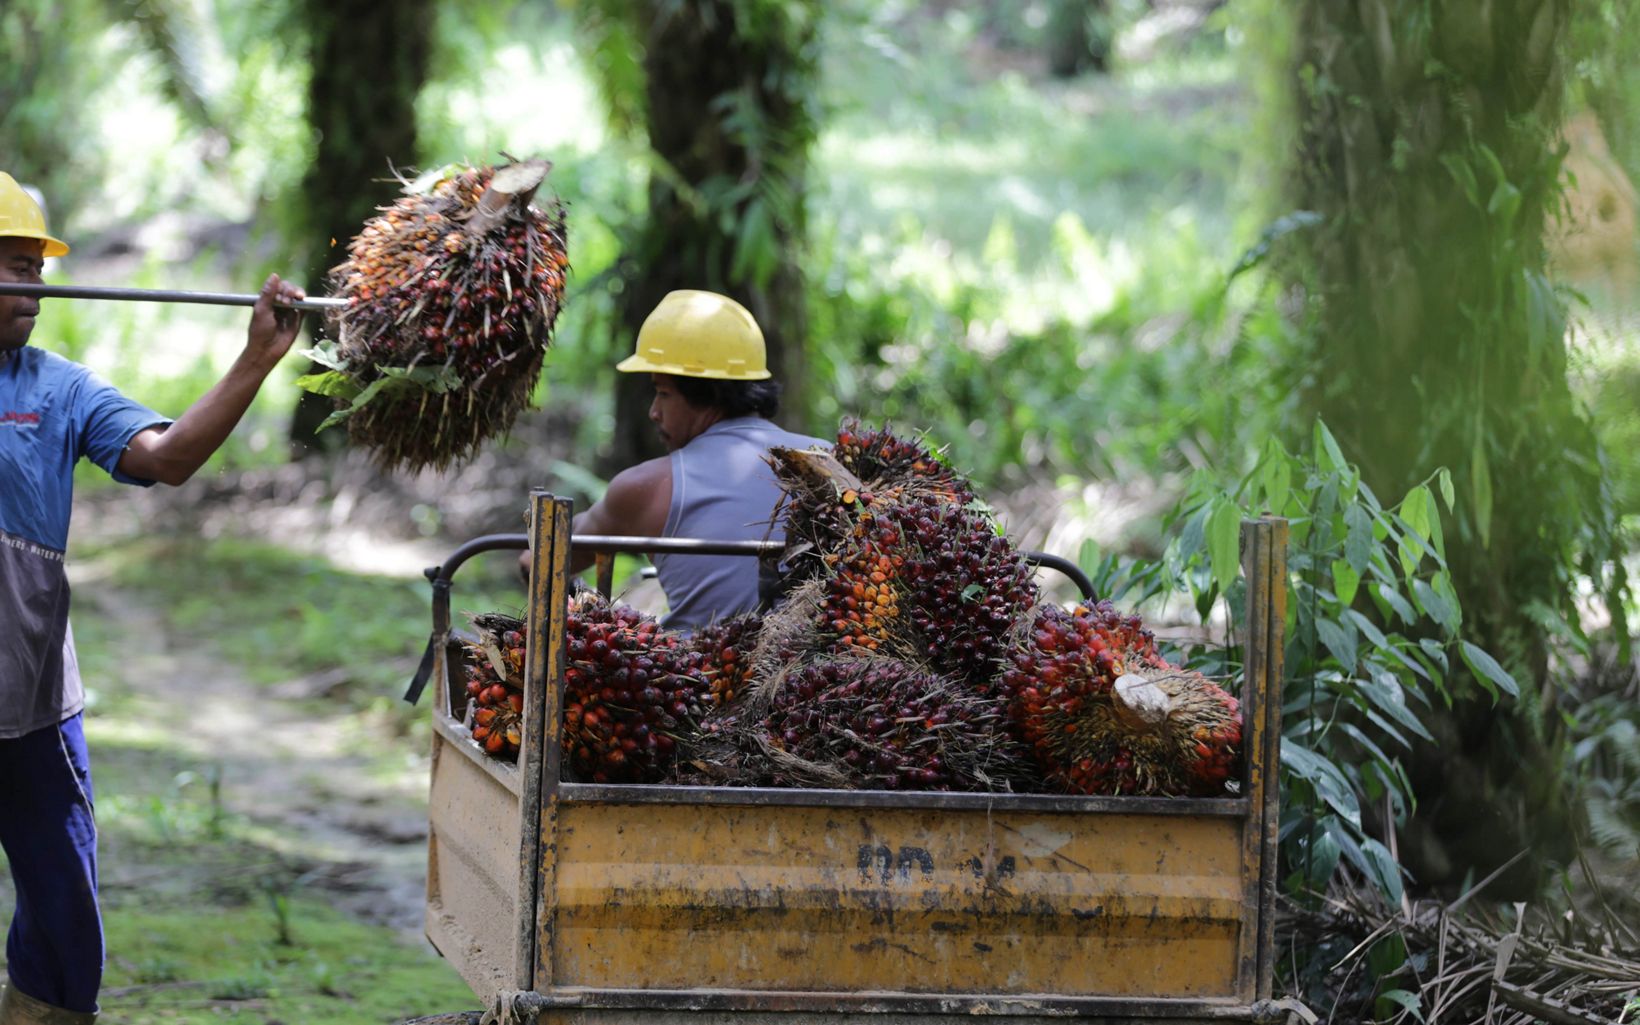 Oil palm harvest Sustainable oil palm plantation is one of YKAN’s efforts in encouraging alternative economic sources in East Kalimantan. © YKAN